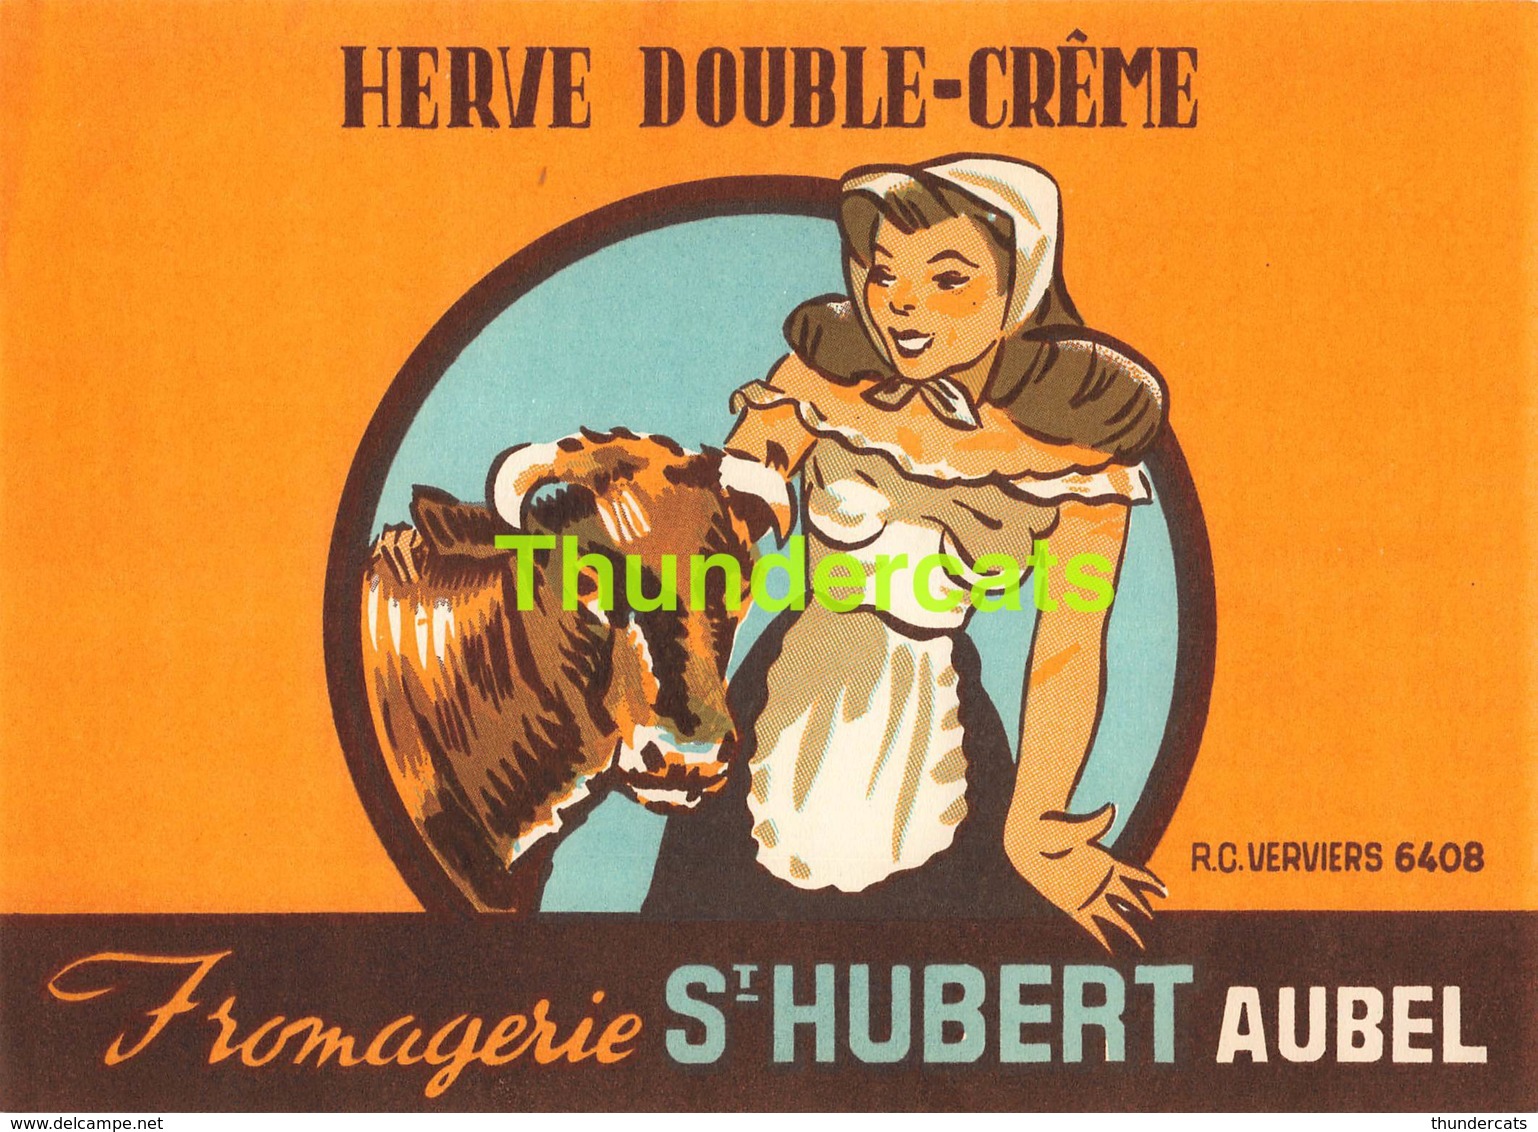 ANCIENNE ETIQUETTE FROMAGE ETIKET KAAS OLD CHEESE LABEL PUB HERVE DOUBLE CREME ST HUBERT AUBEL - Fromage